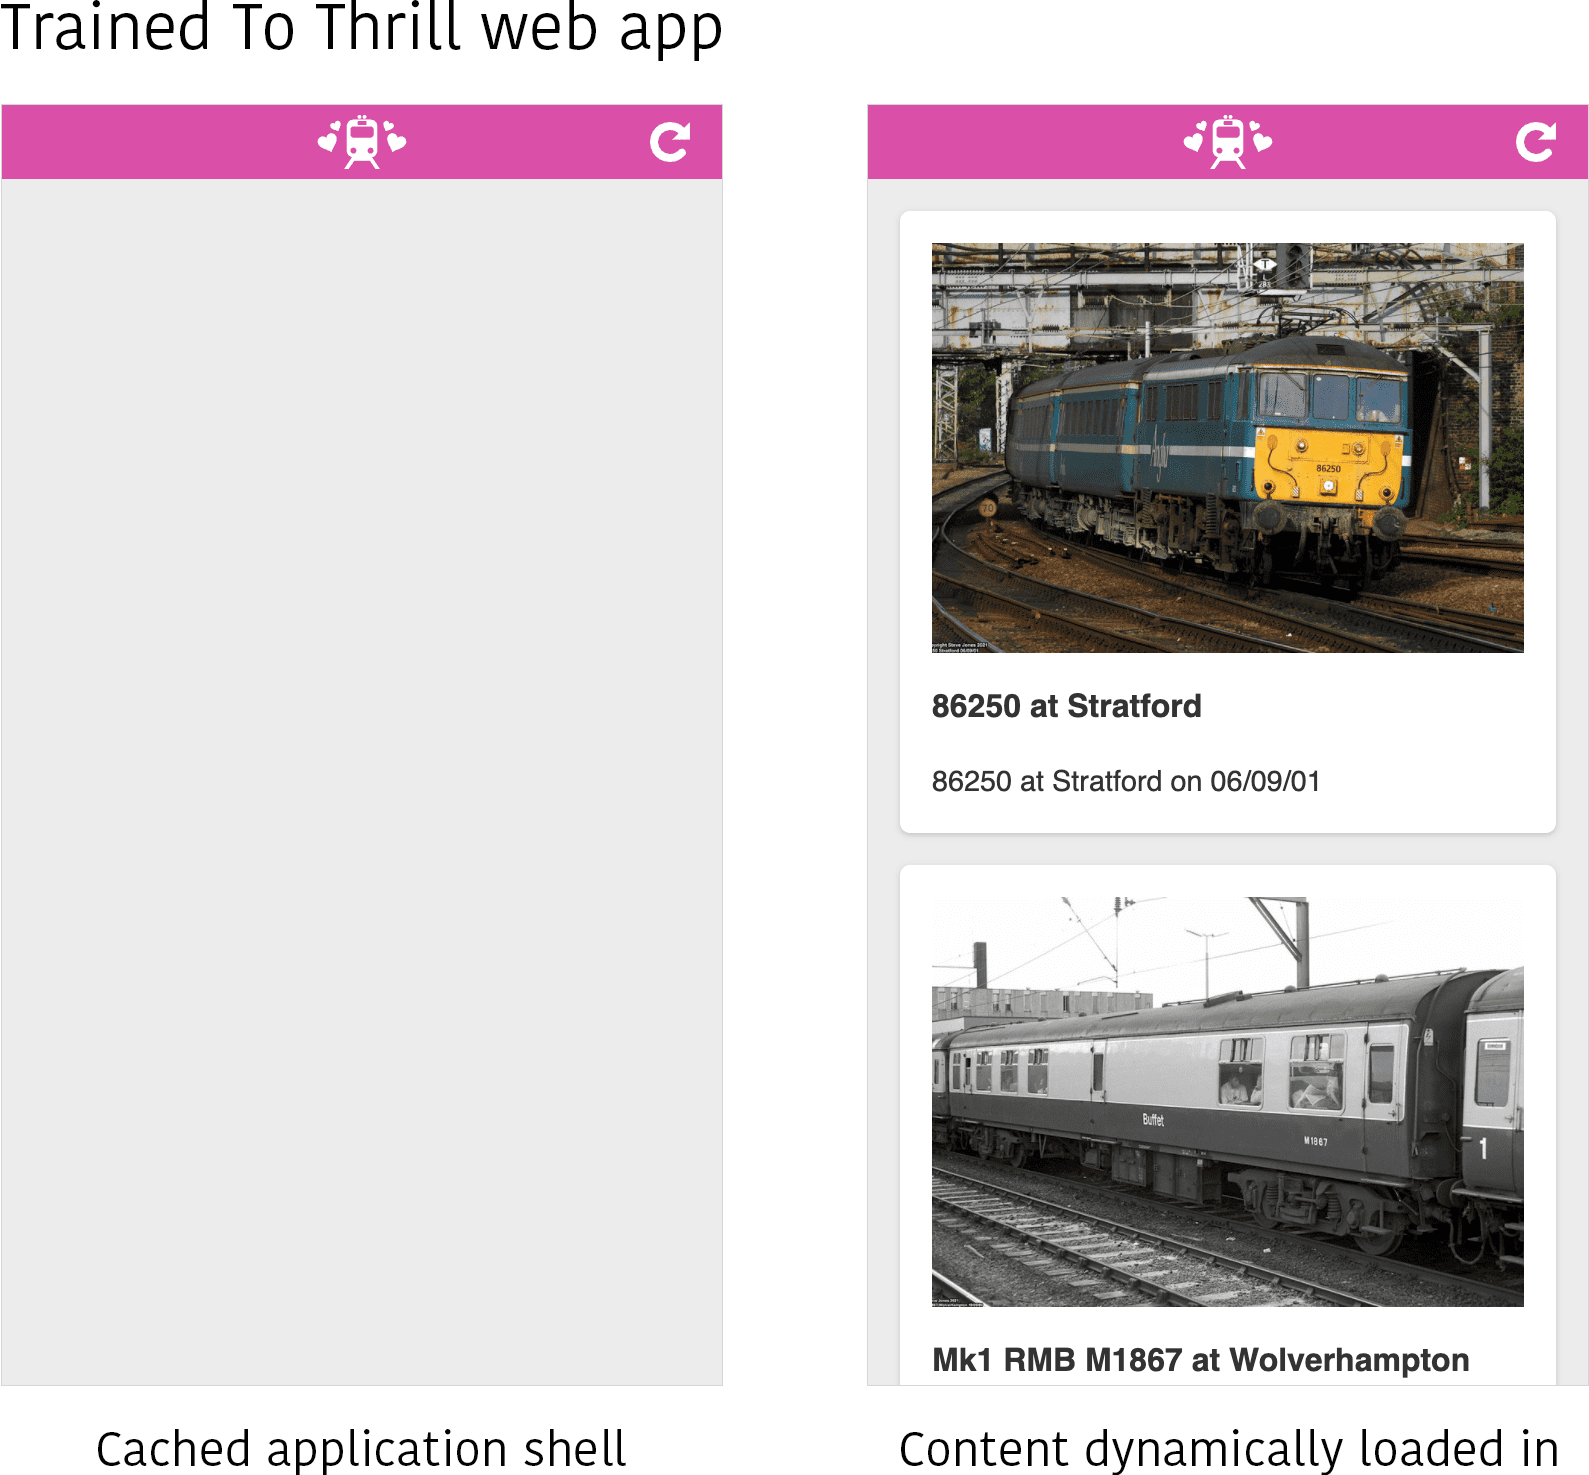 A screenshot of the Trained to Thrill web app in two different states. At left, only the cached application shell is visible, with no content populated. On the right, the content (a few pictures of some trains) are loaded dynamically into the application shell's content area.